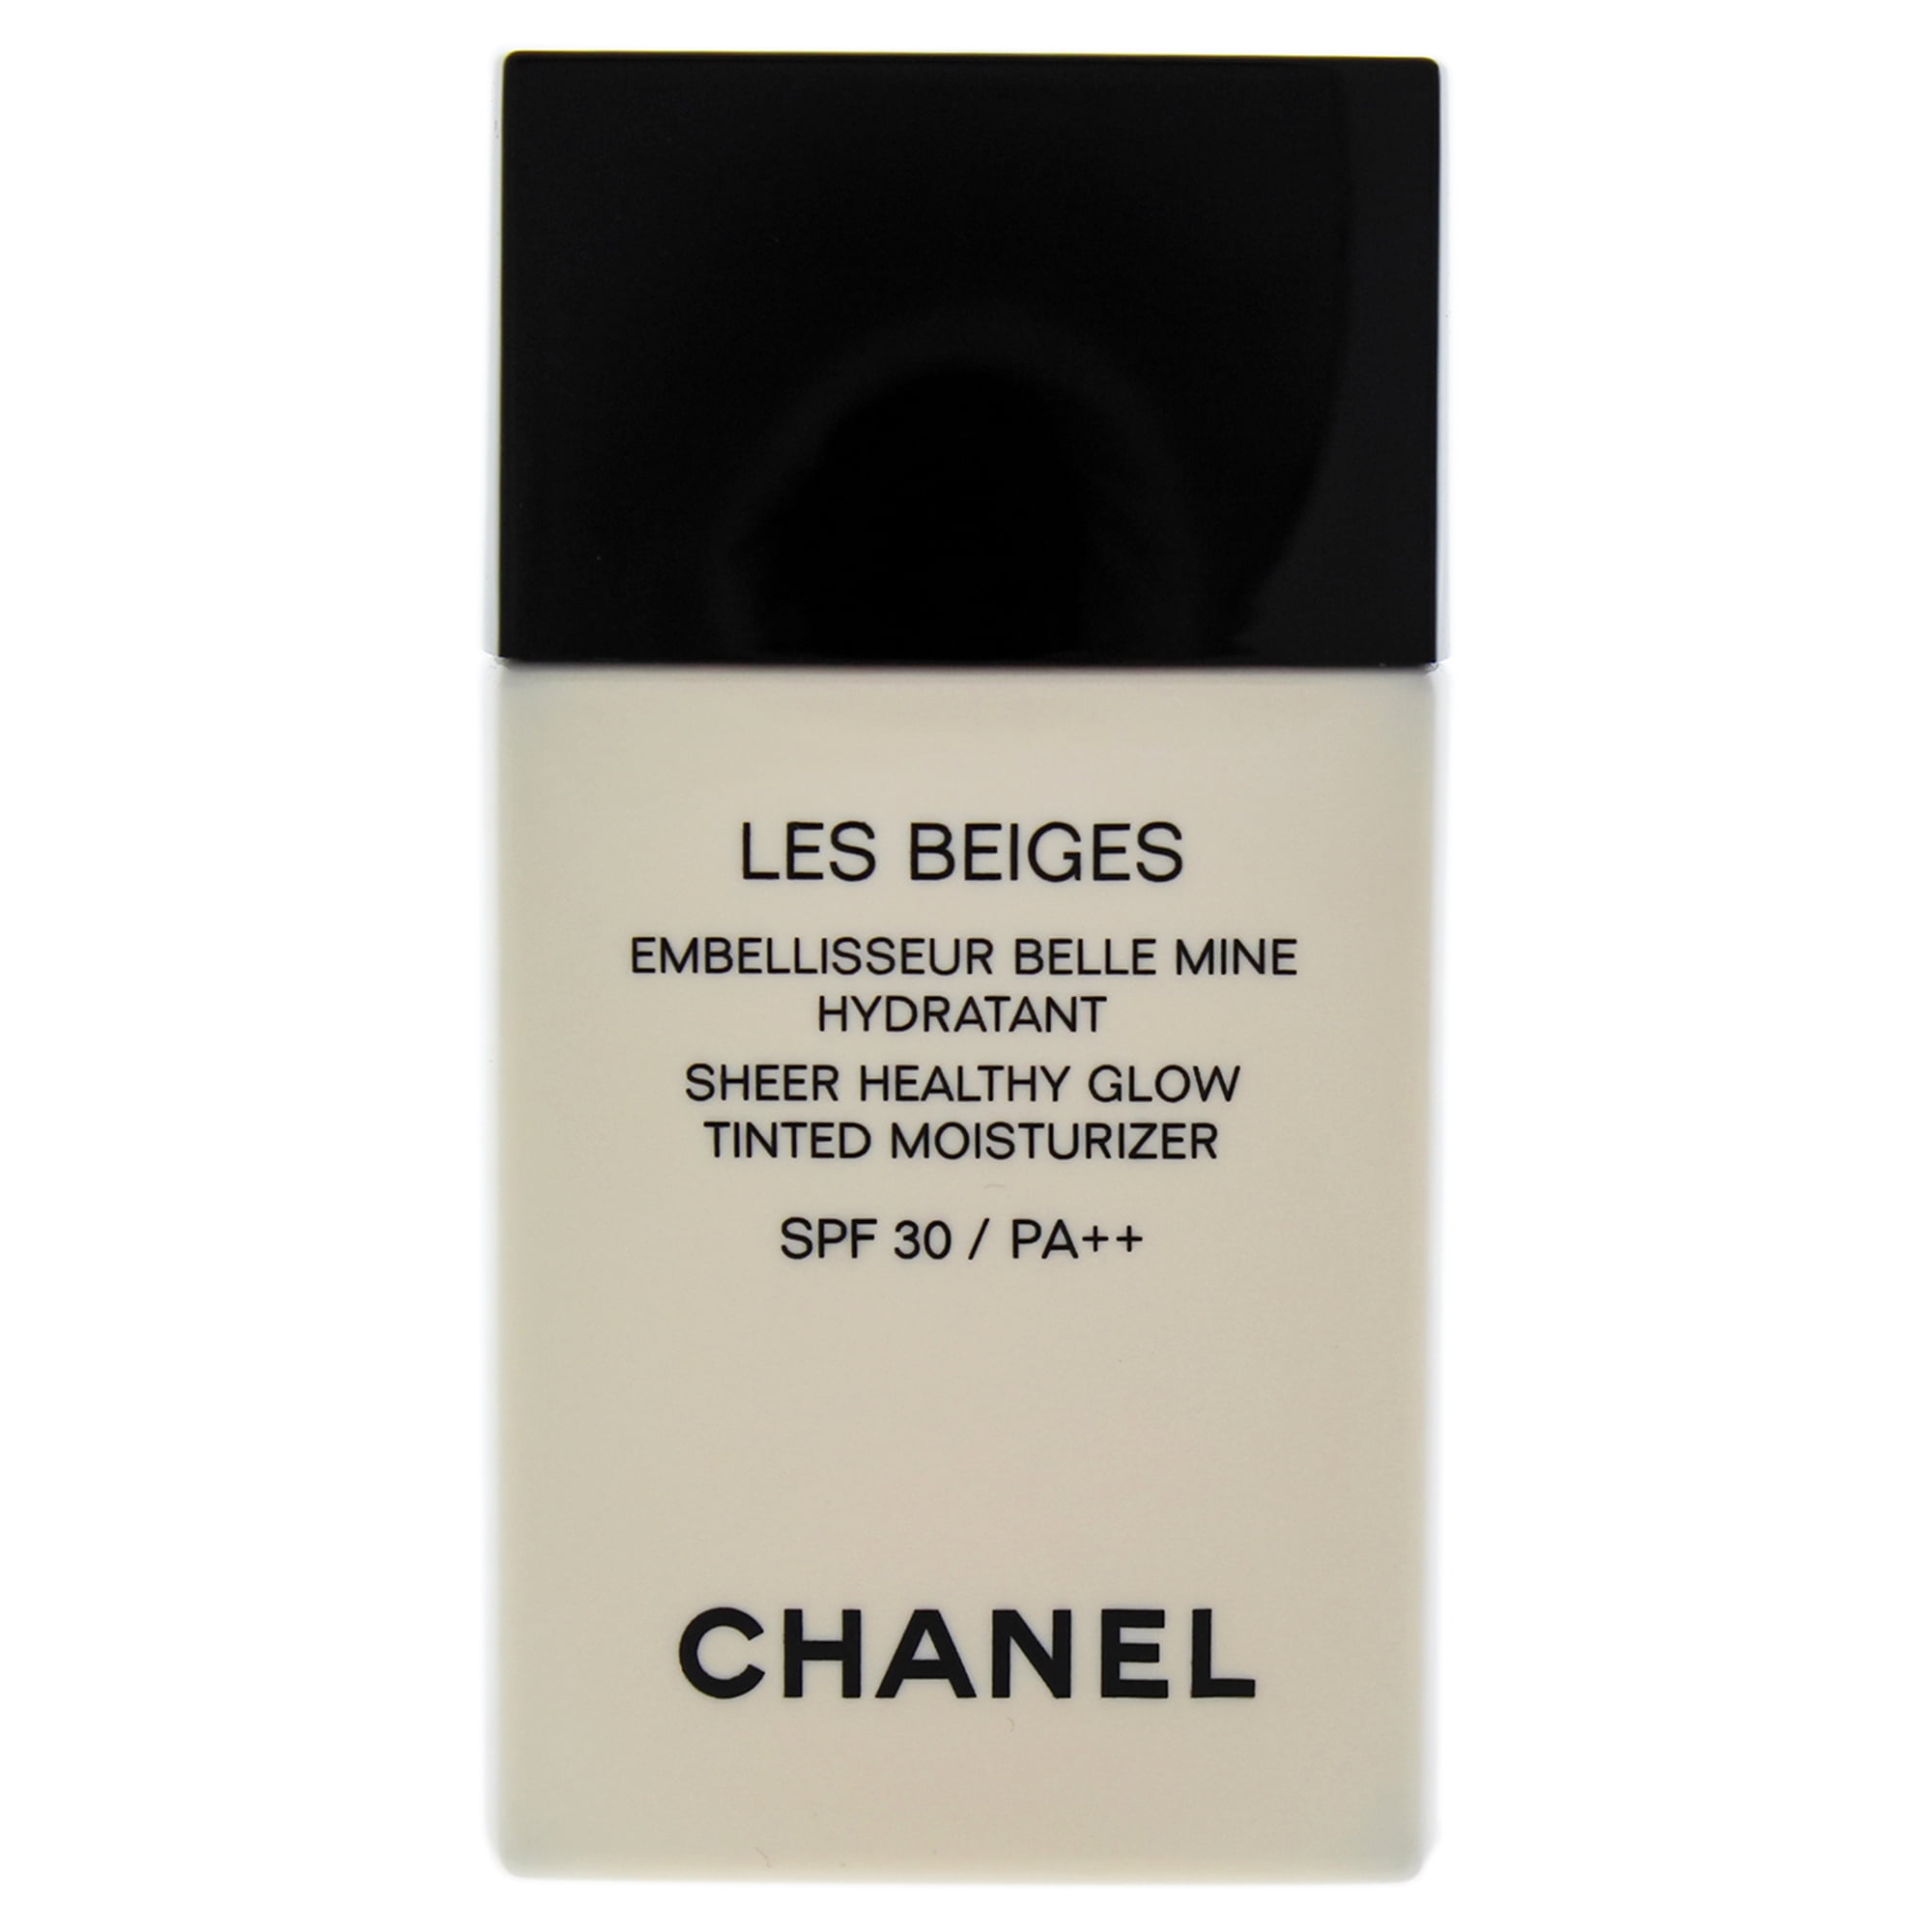 Les Beiges Sheer Healthy Glow Tinted Moisturizer SPF 30 - Deep by Chanel  for Women - 1 oz Foundation 